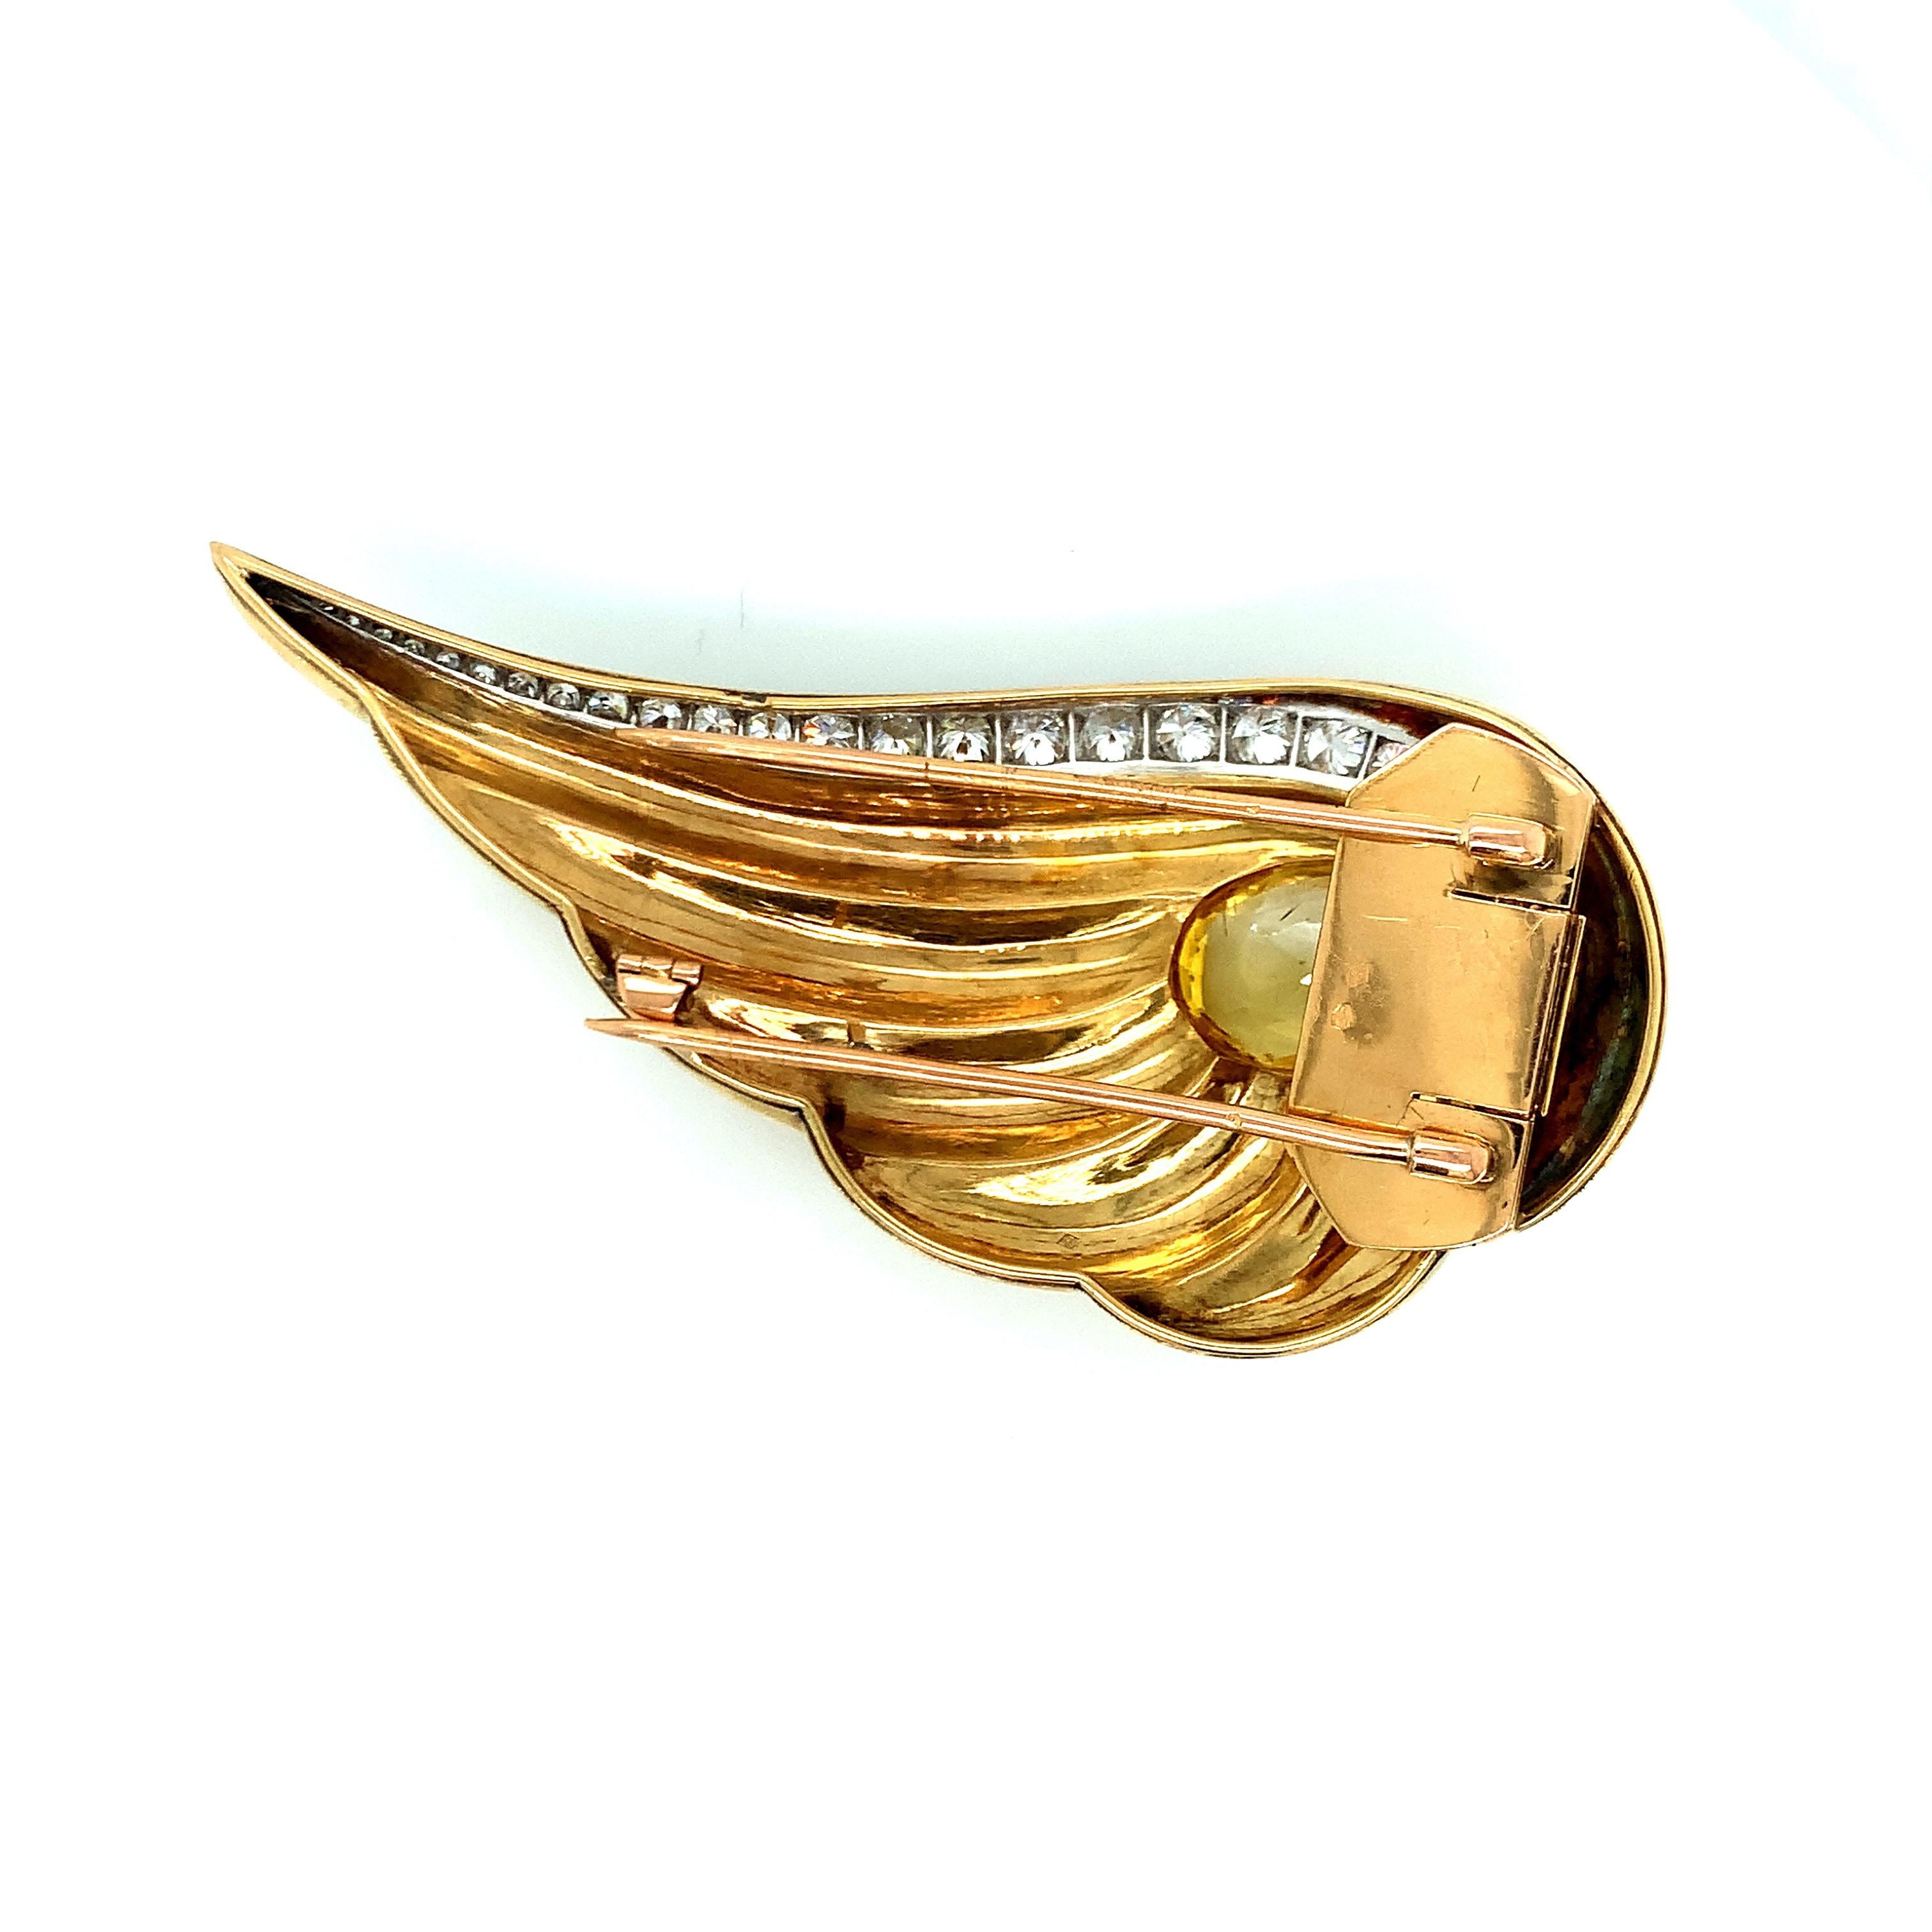 Crafted in 18 karat gold and platinum with a 14 karat pin clutch, this brooch is set with an oval-shaped yellow sapphire weighing a total of approximately 10.20 carats. Its diamonds are old-European, round, and single cut -- all weighing a total of